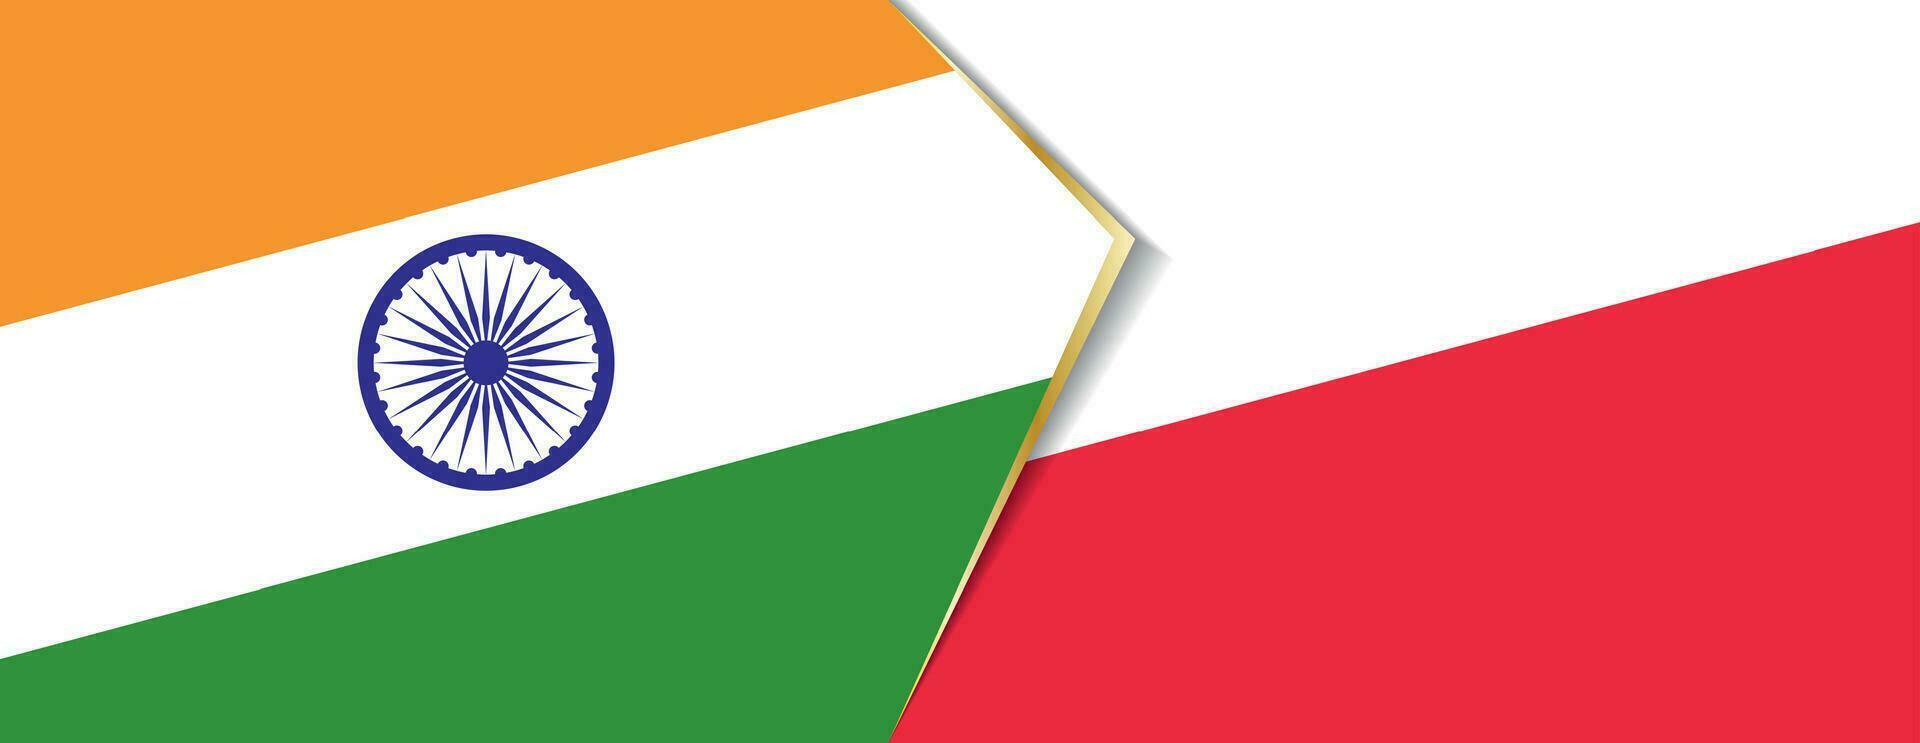 India and Poland flags, two vector flags.